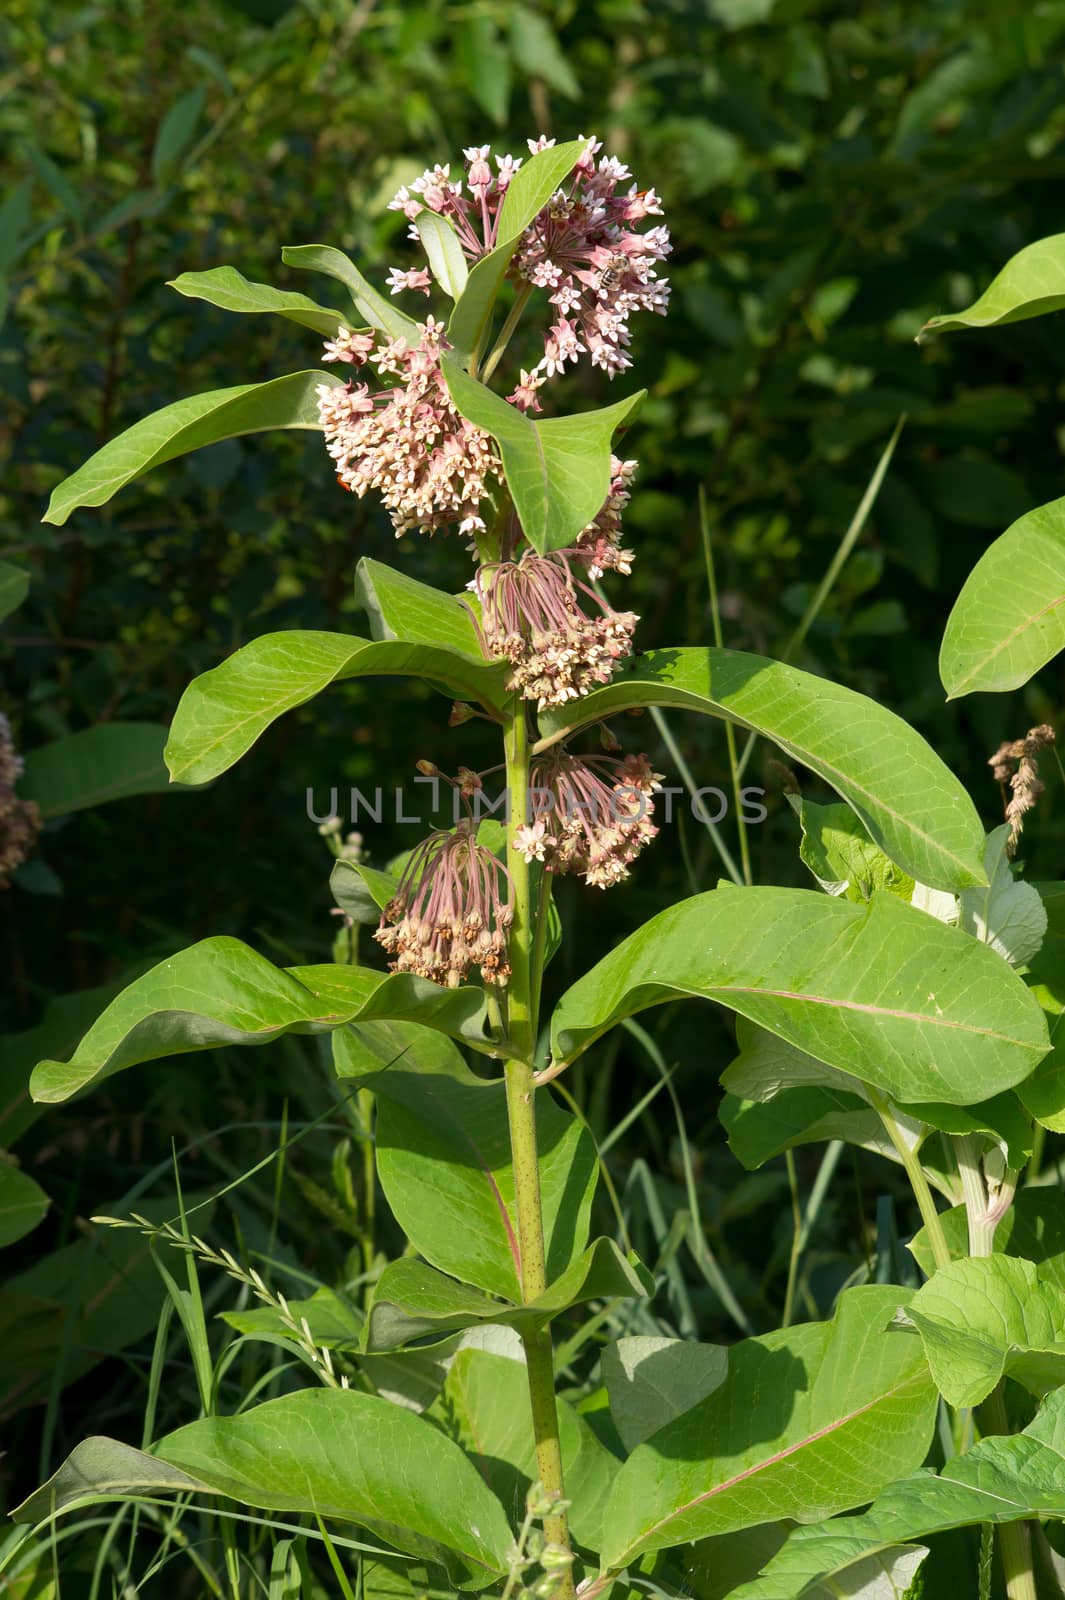 The milkweed (Asclepias syriaca) plants in the fields.